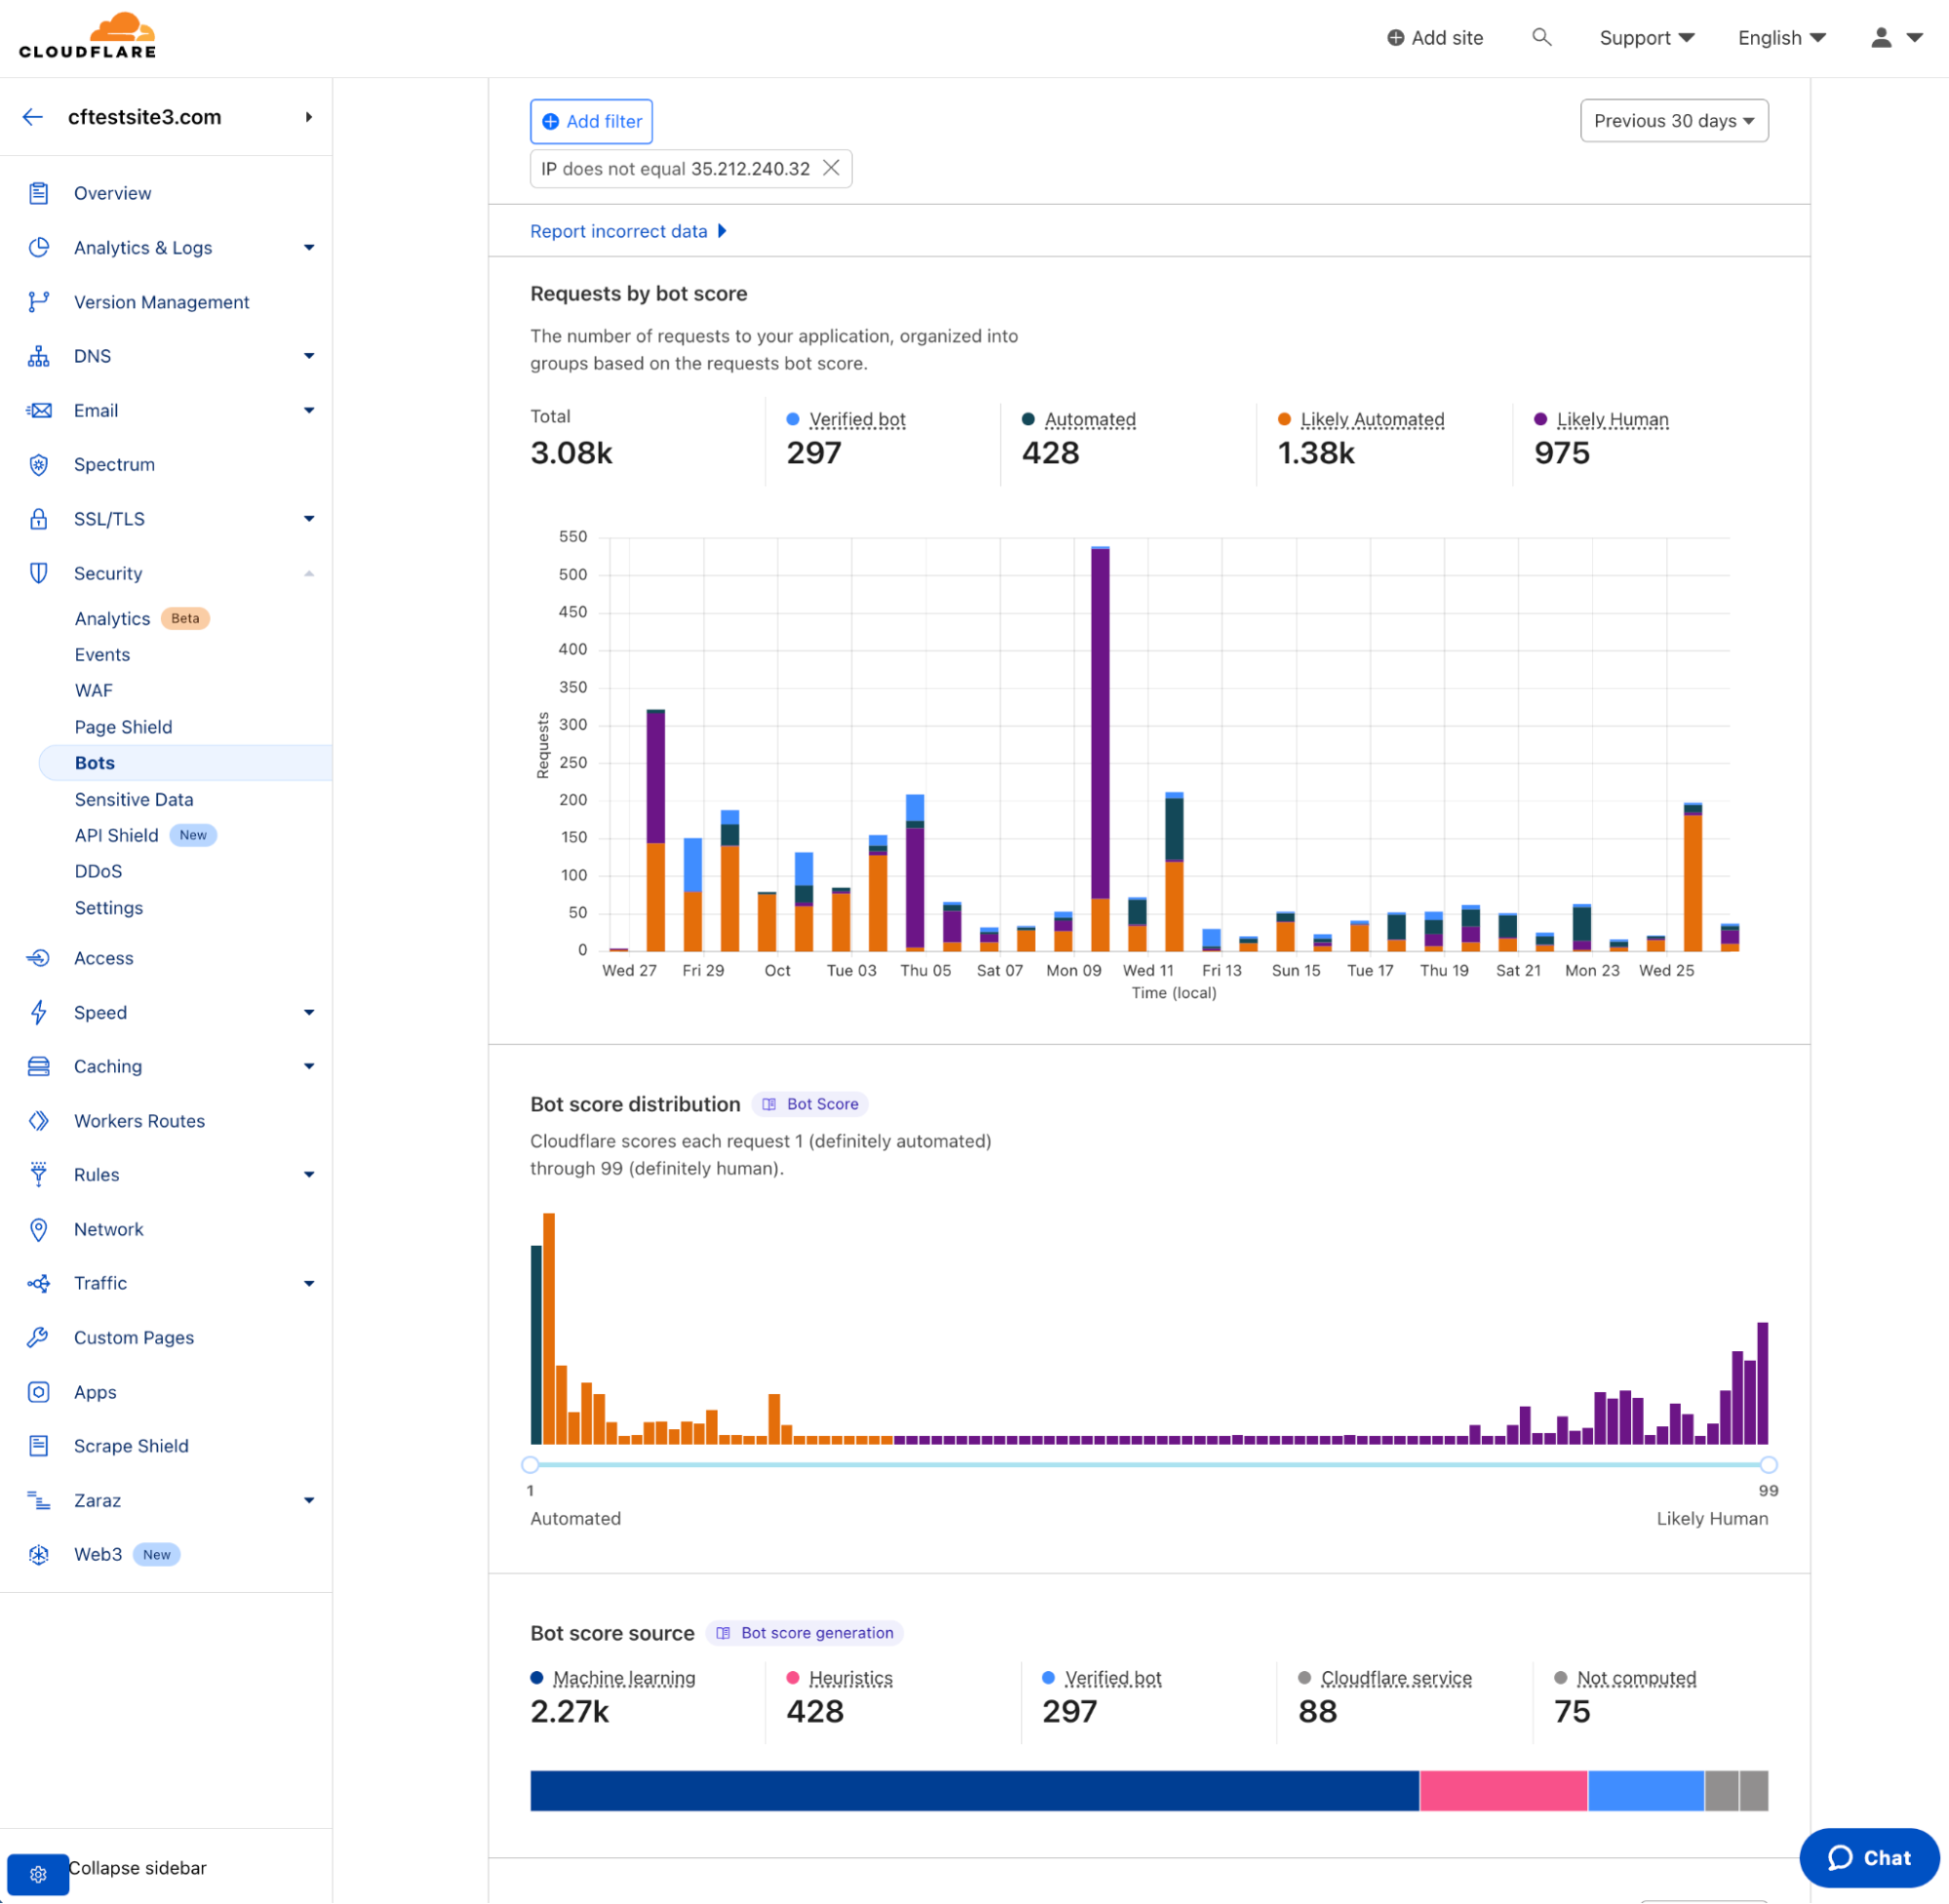 Cloudflare provides analytics and insights into bot traffic including bot score distribution.